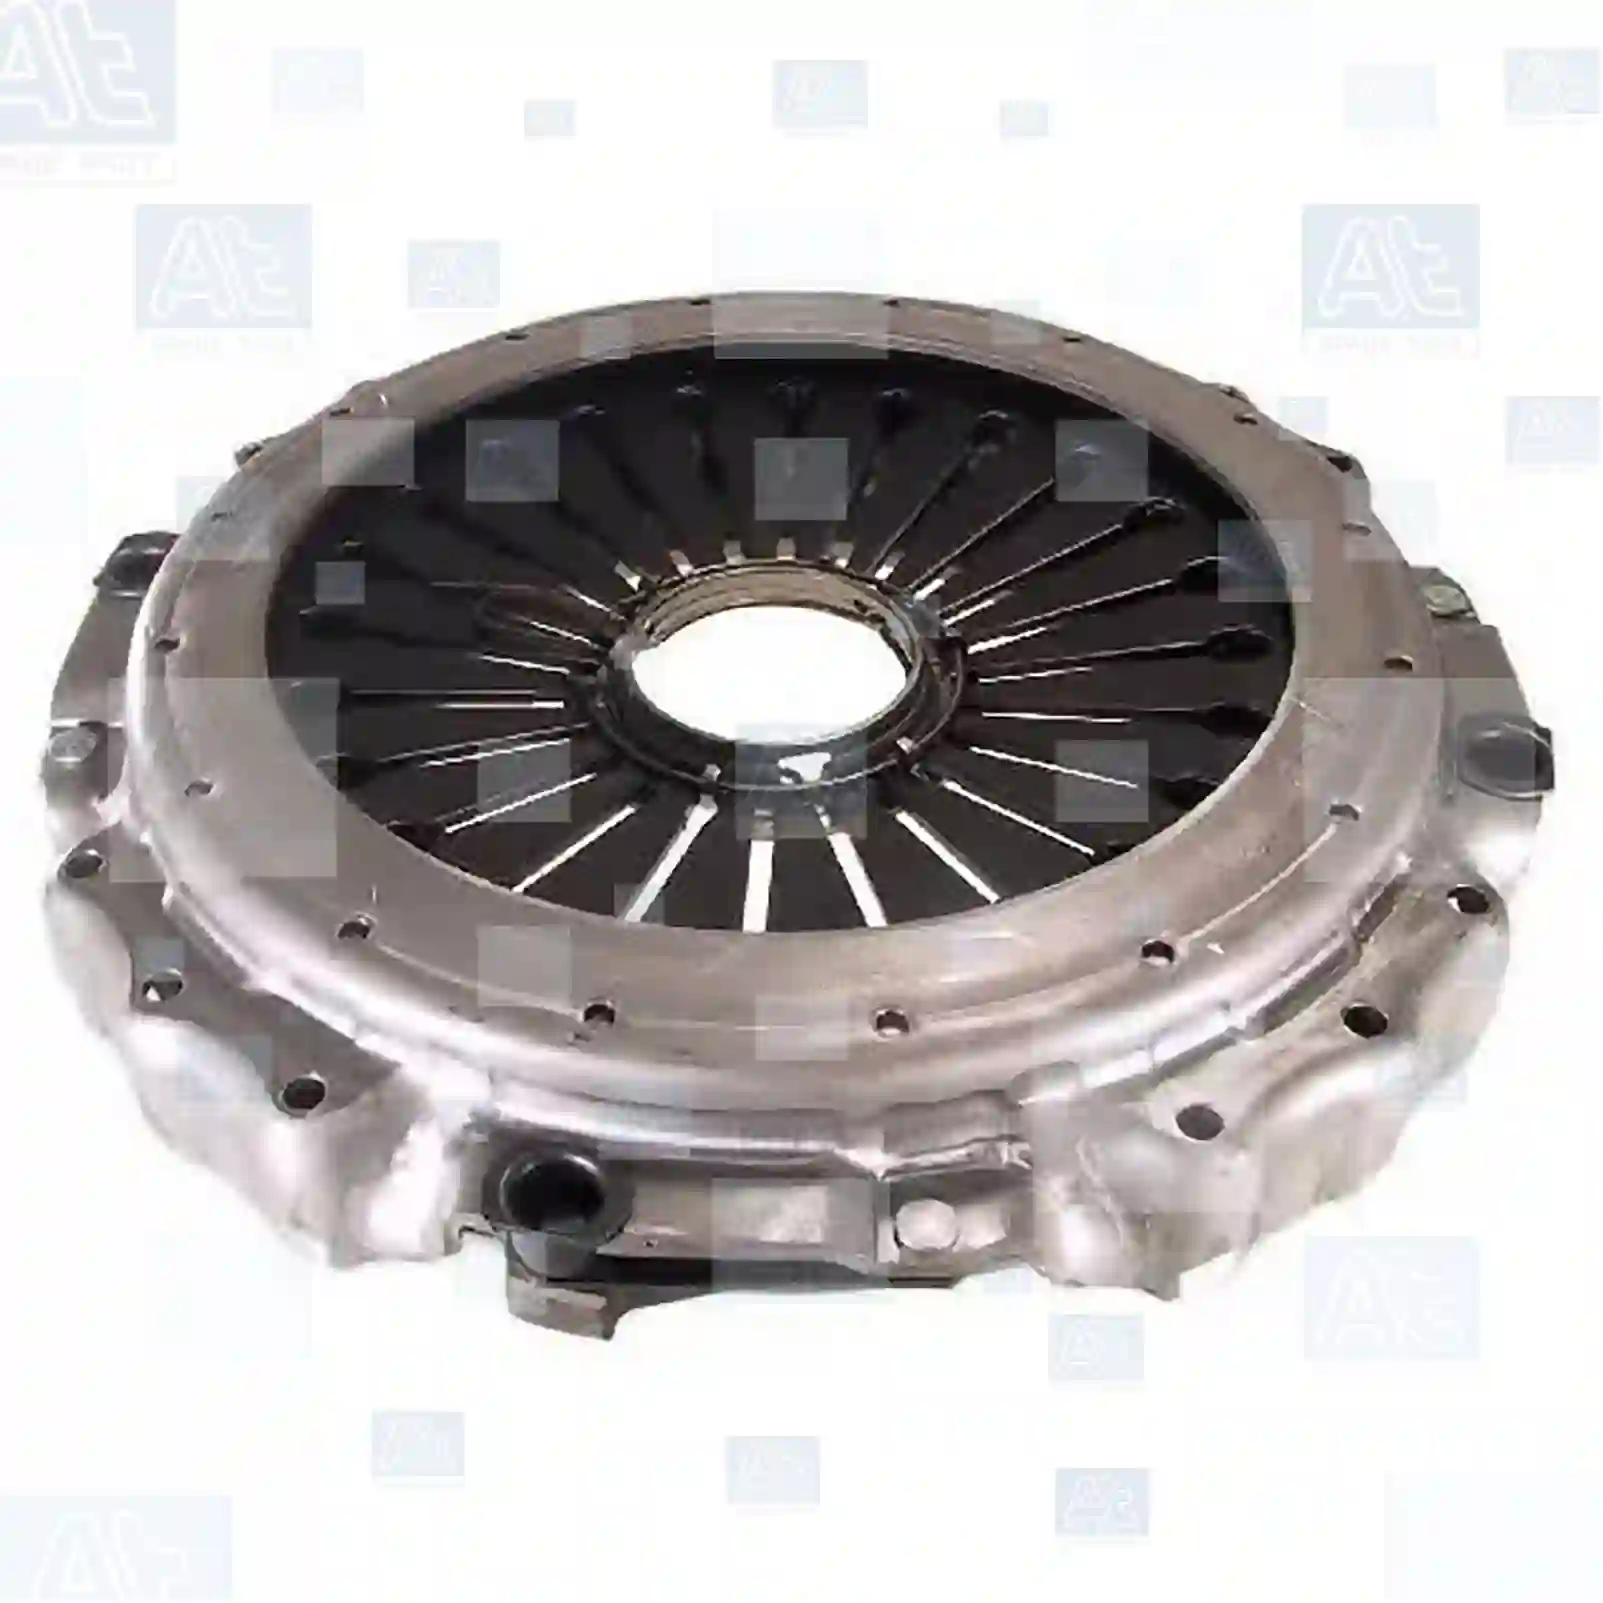 Clutch cover, 77722677, 20257128, 1204205, 1204205A, 1204205R, 1329459, 1329549, 1329549A, 1329549R, 500697757, 312103200A, 42102947, 500697757, 81303050138, 81303050139, 81303050158, 81303050165, 81303050166, 81303050179, 81303050182, 81303050191, 81303050193, 81303050194, 81303059166, 81303059191, 81303059193, 81303059194, N1011009971, 011009971, 81303050158, 81303050191, 81303050193, 81303059193, 8383292000, 8383318000 ||  77722677 At Spare Part | Engine, Accelerator Pedal, Camshaft, Connecting Rod, Crankcase, Crankshaft, Cylinder Head, Engine Suspension Mountings, Exhaust Manifold, Exhaust Gas Recirculation, Filter Kits, Flywheel Housing, General Overhaul Kits, Engine, Intake Manifold, Oil Cleaner, Oil Cooler, Oil Filter, Oil Pump, Oil Sump, Piston & Liner, Sensor & Switch, Timing Case, Turbocharger, Cooling System, Belt Tensioner, Coolant Filter, Coolant Pipe, Corrosion Prevention Agent, Drive, Expansion Tank, Fan, Intercooler, Monitors & Gauges, Radiator, Thermostat, V-Belt / Timing belt, Water Pump, Fuel System, Electronical Injector Unit, Feed Pump, Fuel Filter, cpl., Fuel Gauge Sender,  Fuel Line, Fuel Pump, Fuel Tank, Injection Line Kit, Injection Pump, Exhaust System, Clutch & Pedal, Gearbox, Propeller Shaft, Axles, Brake System, Hubs & Wheels, Suspension, Leaf Spring, Universal Parts / Accessories, Steering, Electrical System, Cabin Clutch cover, 77722677, 20257128, 1204205, 1204205A, 1204205R, 1329459, 1329549, 1329549A, 1329549R, 500697757, 312103200A, 42102947, 500697757, 81303050138, 81303050139, 81303050158, 81303050165, 81303050166, 81303050179, 81303050182, 81303050191, 81303050193, 81303050194, 81303059166, 81303059191, 81303059193, 81303059194, N1011009971, 011009971, 81303050158, 81303050191, 81303050193, 81303059193, 8383292000, 8383318000 ||  77722677 At Spare Part | Engine, Accelerator Pedal, Camshaft, Connecting Rod, Crankcase, Crankshaft, Cylinder Head, Engine Suspension Mountings, Exhaust Manifold, Exhaust Gas Recirculation, Filter Kits, Flywheel Housing, General Overhaul Kits, Engine, Intake Manifold, Oil Cleaner, Oil Cooler, Oil Filter, Oil Pump, Oil Sump, Piston & Liner, Sensor & Switch, Timing Case, Turbocharger, Cooling System, Belt Tensioner, Coolant Filter, Coolant Pipe, Corrosion Prevention Agent, Drive, Expansion Tank, Fan, Intercooler, Monitors & Gauges, Radiator, Thermostat, V-Belt / Timing belt, Water Pump, Fuel System, Electronical Injector Unit, Feed Pump, Fuel Filter, cpl., Fuel Gauge Sender,  Fuel Line, Fuel Pump, Fuel Tank, Injection Line Kit, Injection Pump, Exhaust System, Clutch & Pedal, Gearbox, Propeller Shaft, Axles, Brake System, Hubs & Wheels, Suspension, Leaf Spring, Universal Parts / Accessories, Steering, Electrical System, Cabin